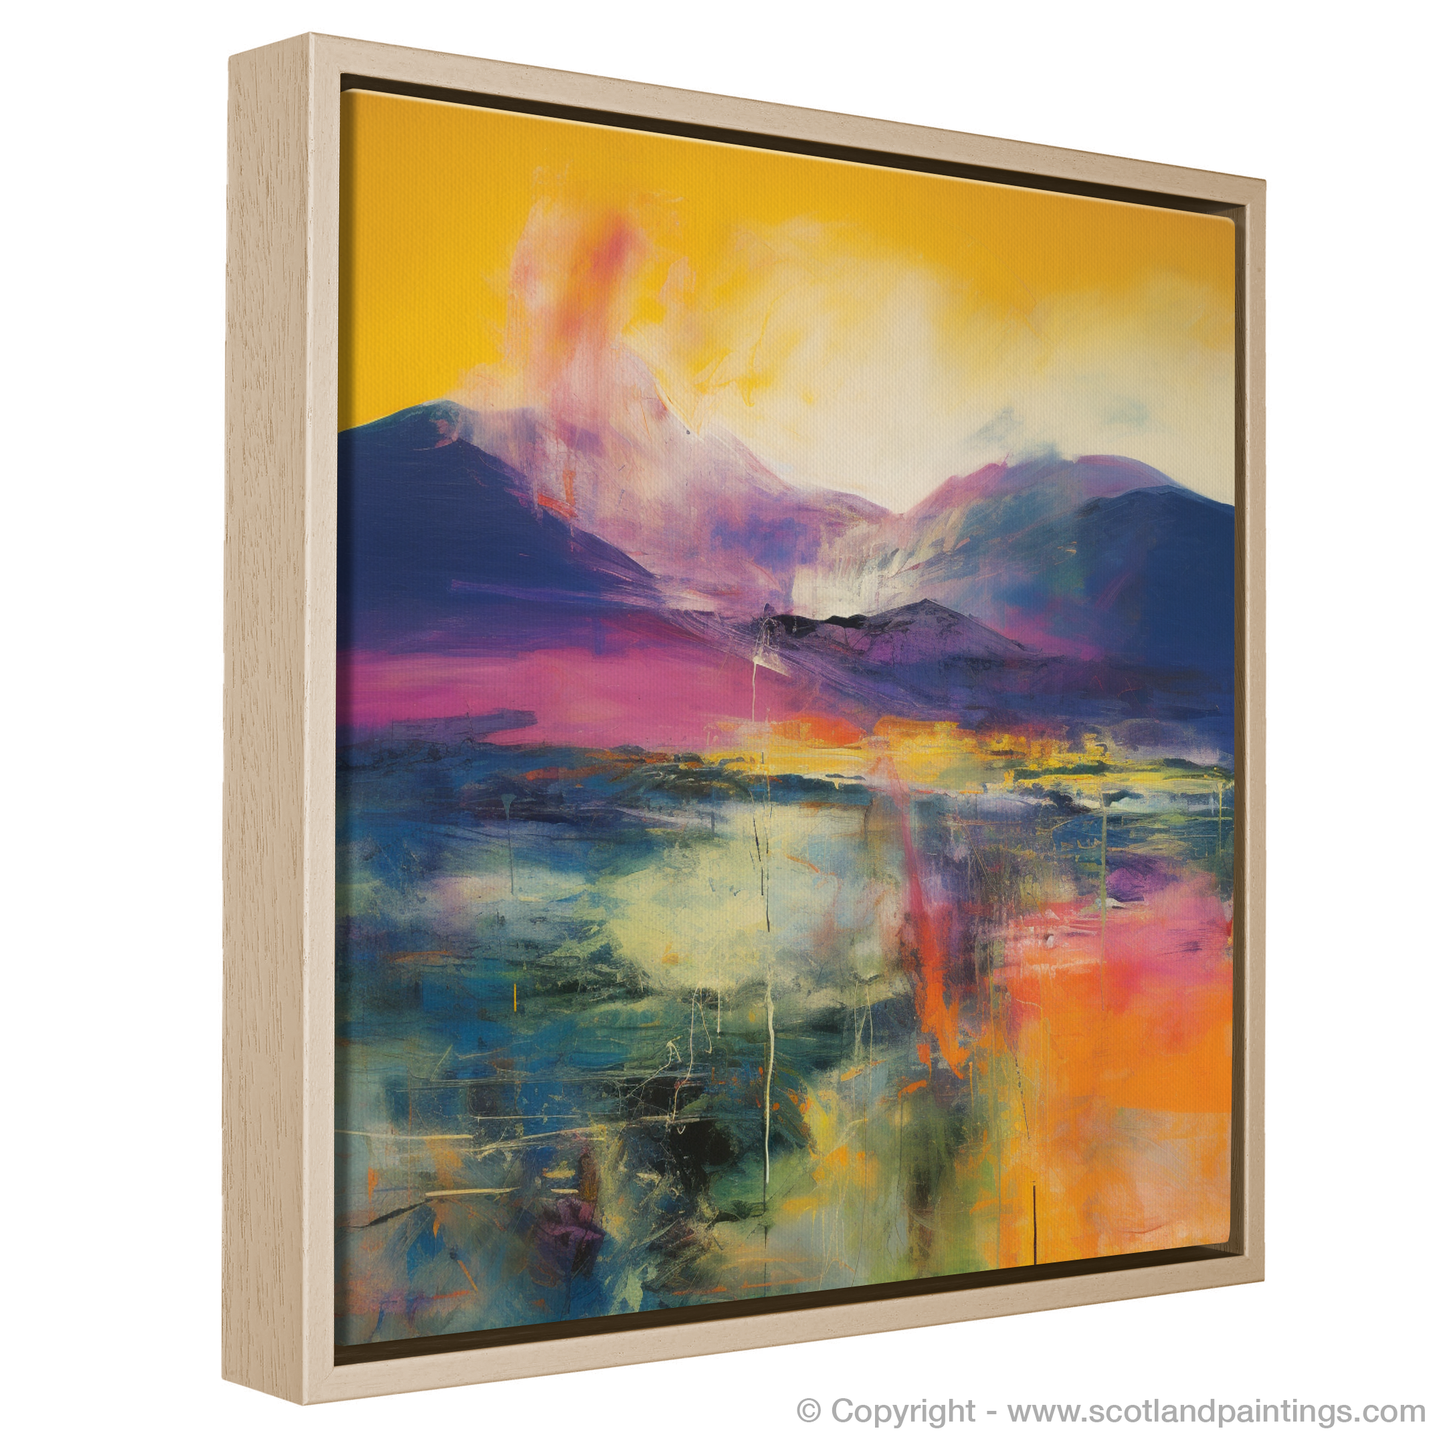 Painting and Art Print of Ben Lawers, Perth and Kinross entitled "Ben Lawers: Abstract Symphony of Scottish Grandeur".